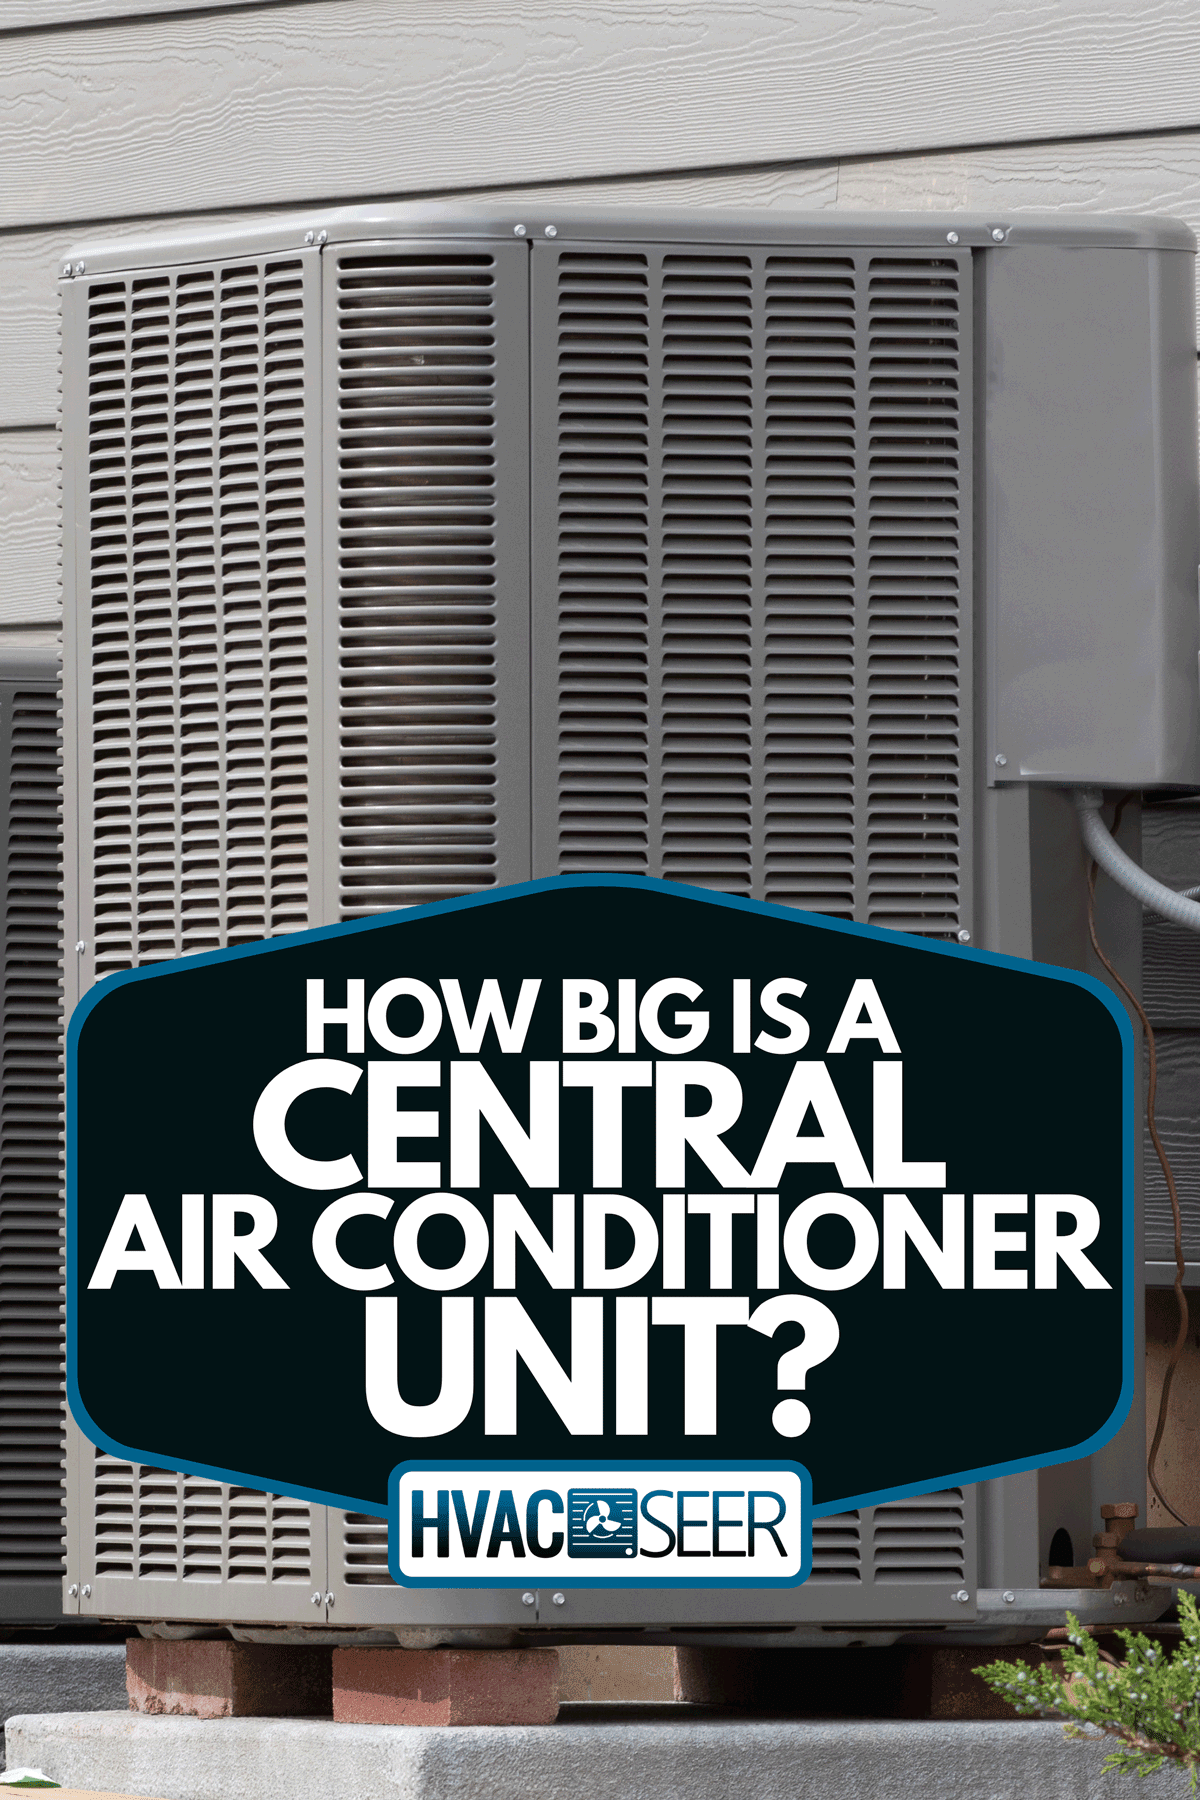 How Big Is A Central Air Conditioner Unit?